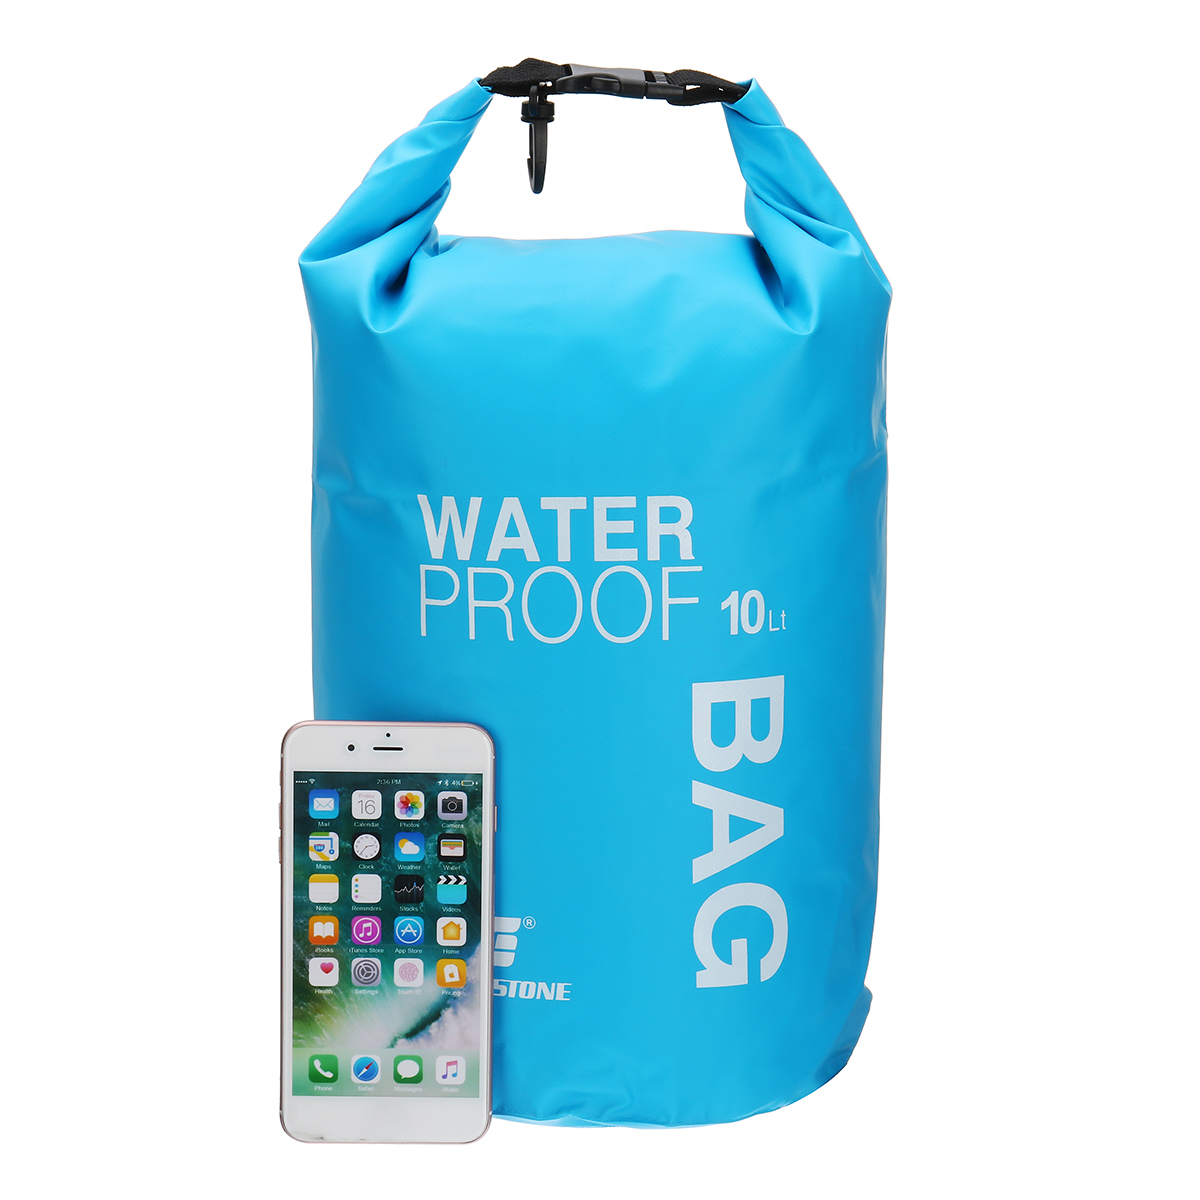 10L-Outdoor-Swimming-Air-Inflation-Floating-Mobile-Phone-Camera-Storage-PVC-Waterproof-Bag-1820807-9